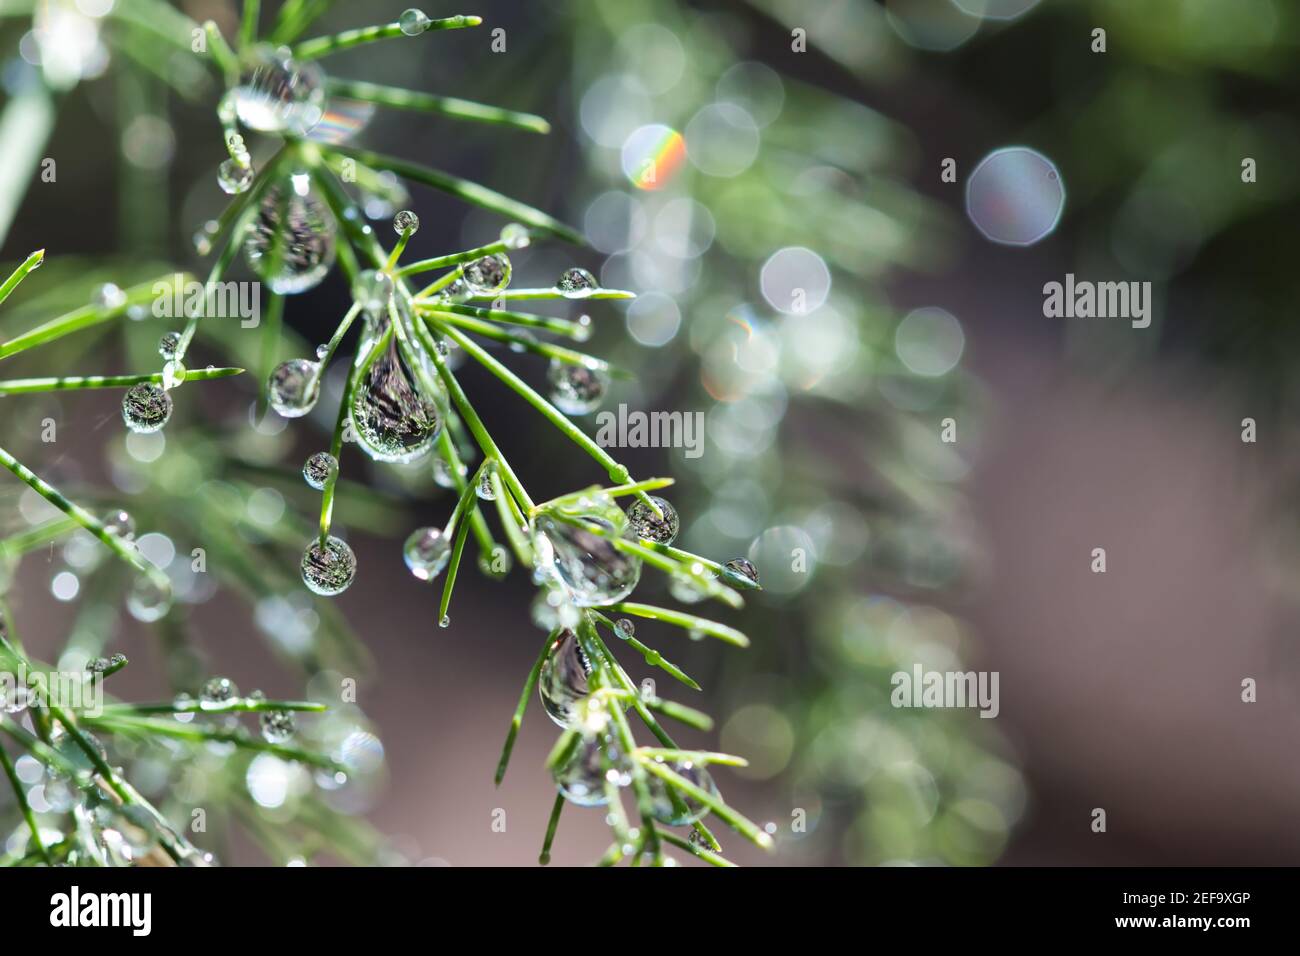 Asparagus delicate green ornamental plant branches with feathery foliage covered with shiny dew, water drops refractions, bokeh blurred background Stock Photo